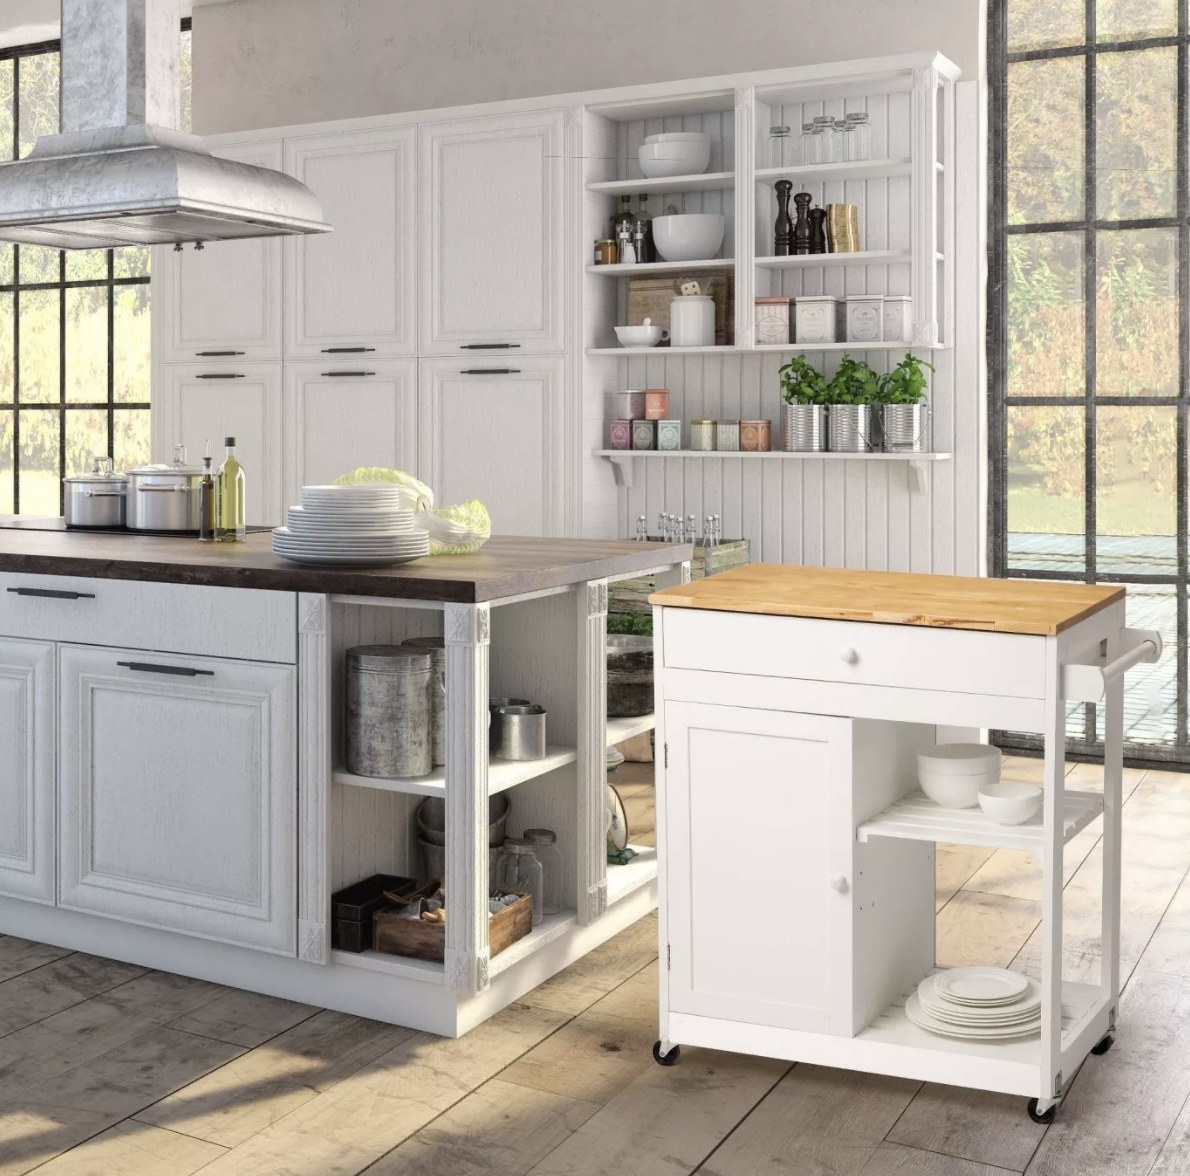 The white kitchen island has a light brown top, two drawers and two shelves